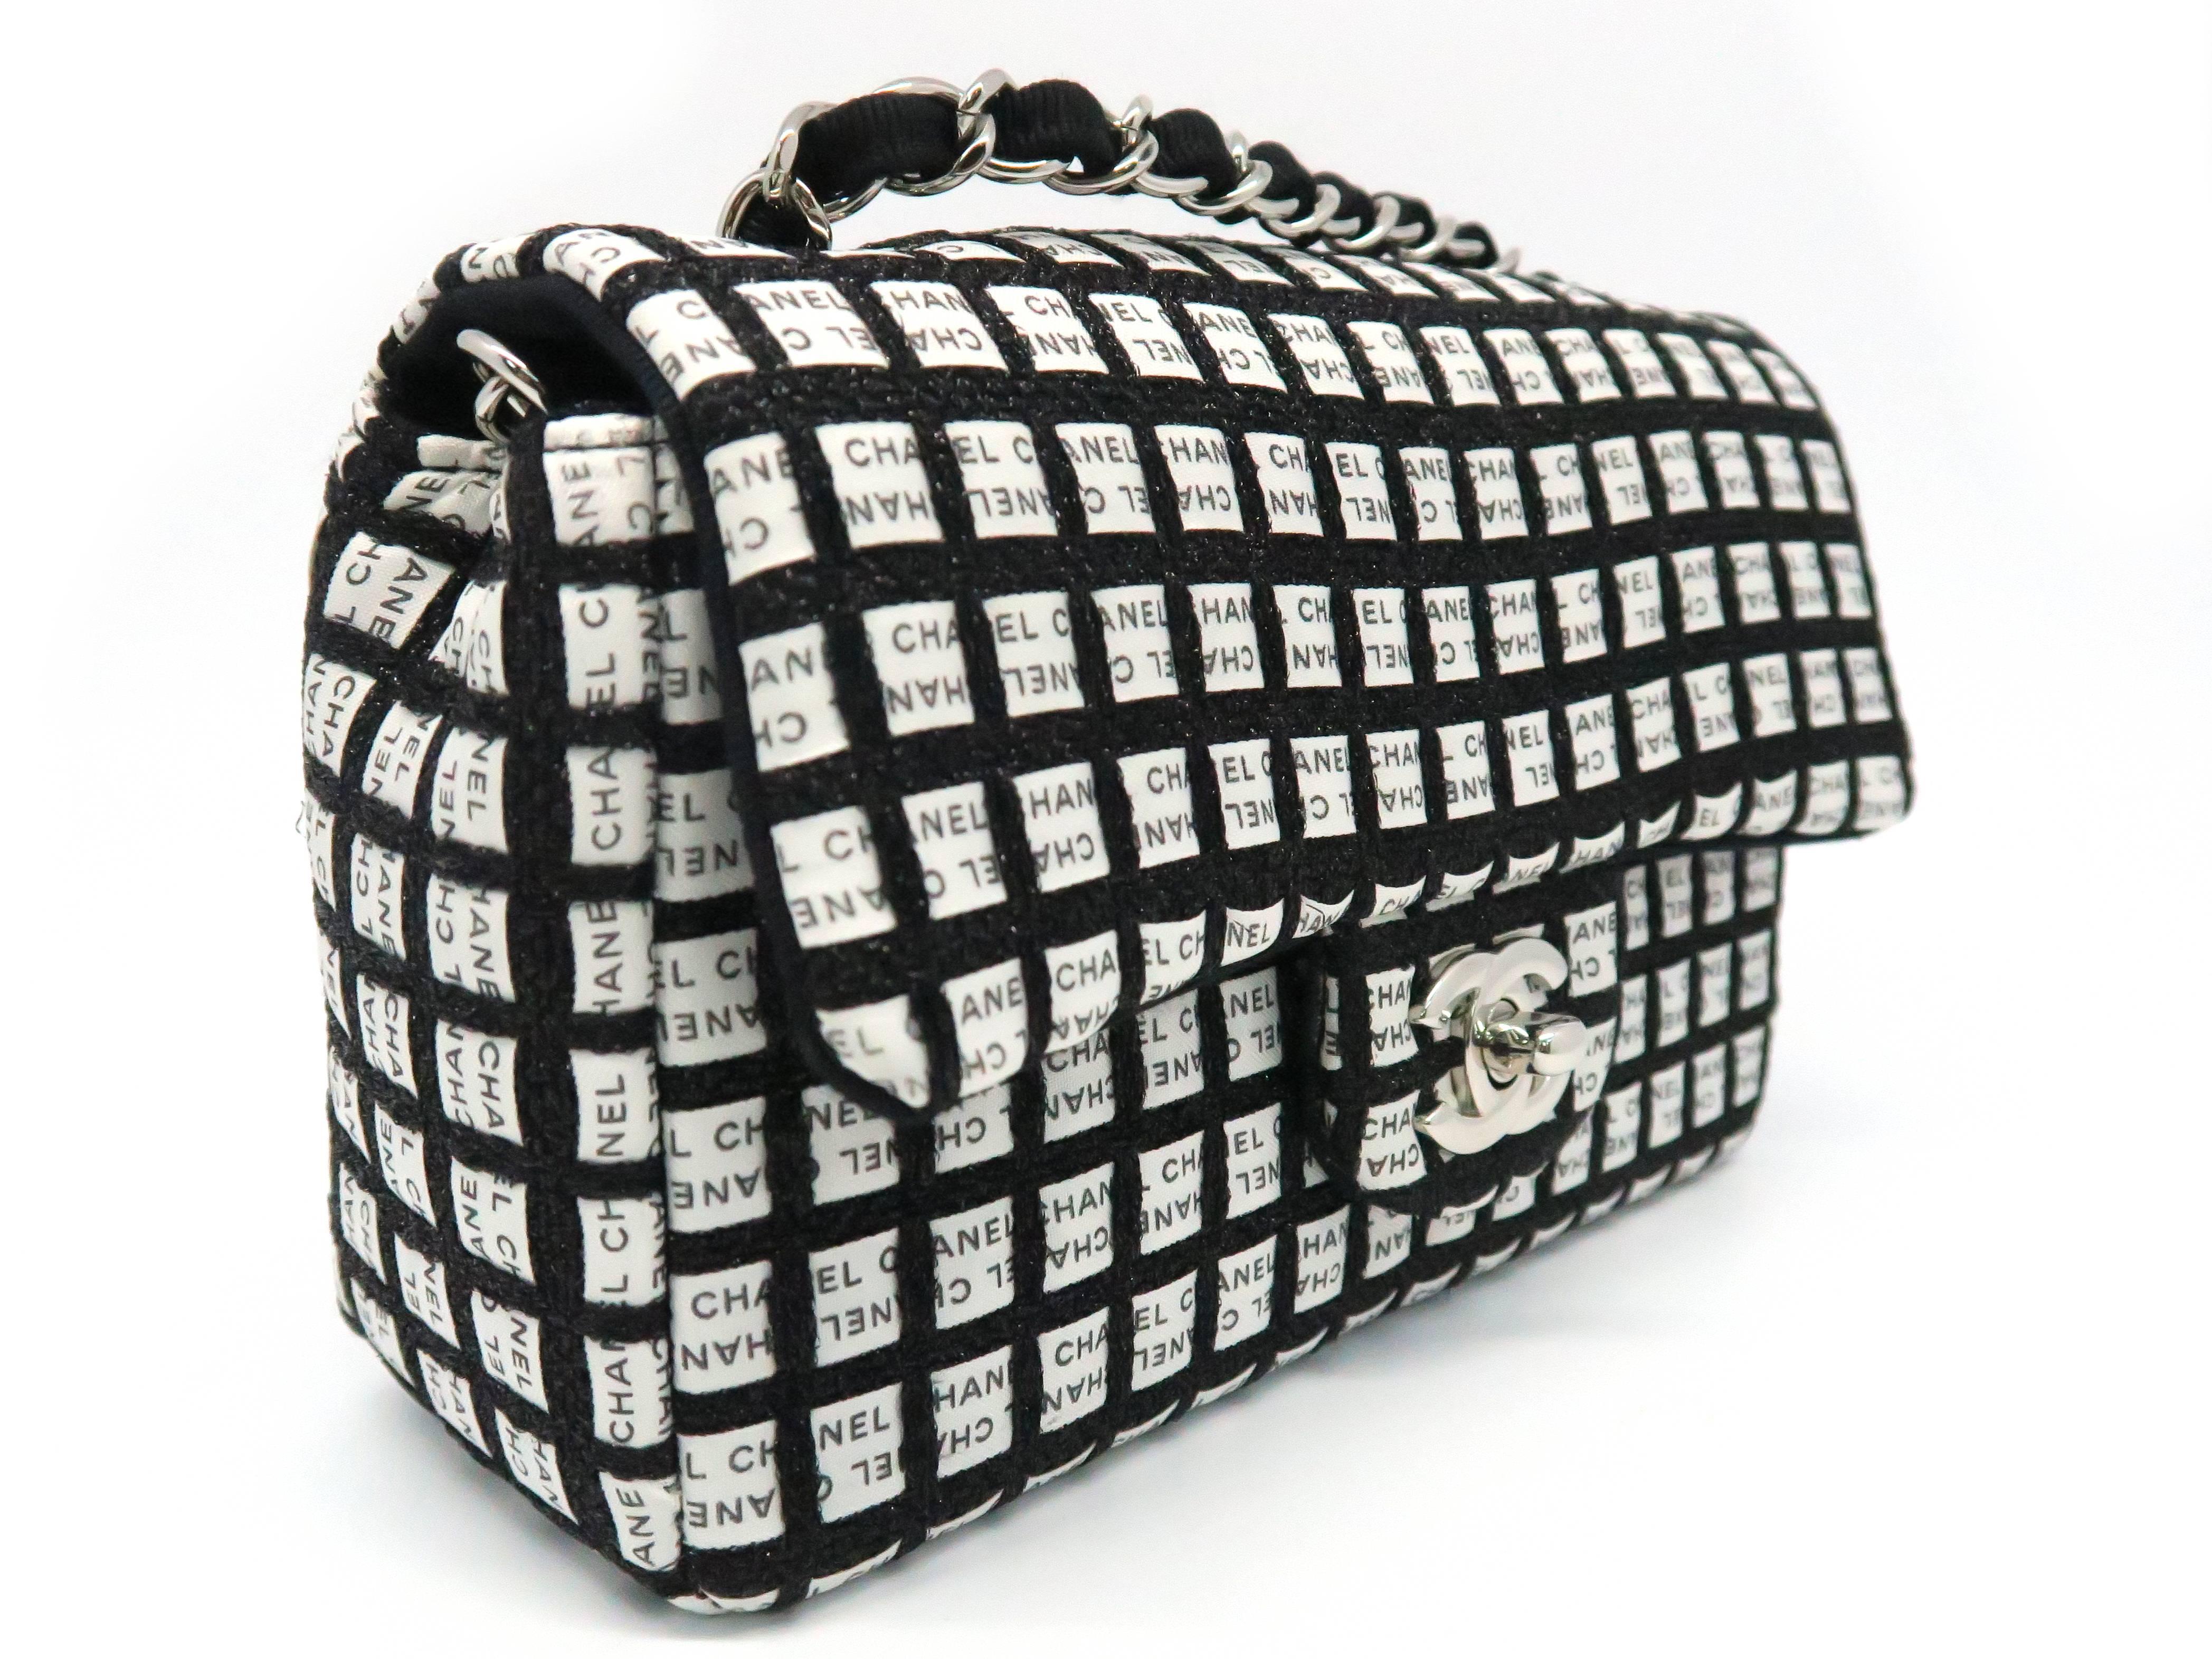 Color: Black and White 

Material: Fabric 

Condition: Rank S 
Overall: Almost New 
Surface: Good
Corners: Good
Edges: Good
Handles/Straps: Minor Good
Hardware: Good

Dimension: W20 × H12 × D6cm（W7.8" × H4.7" × D2.3"）
Shoulder strap